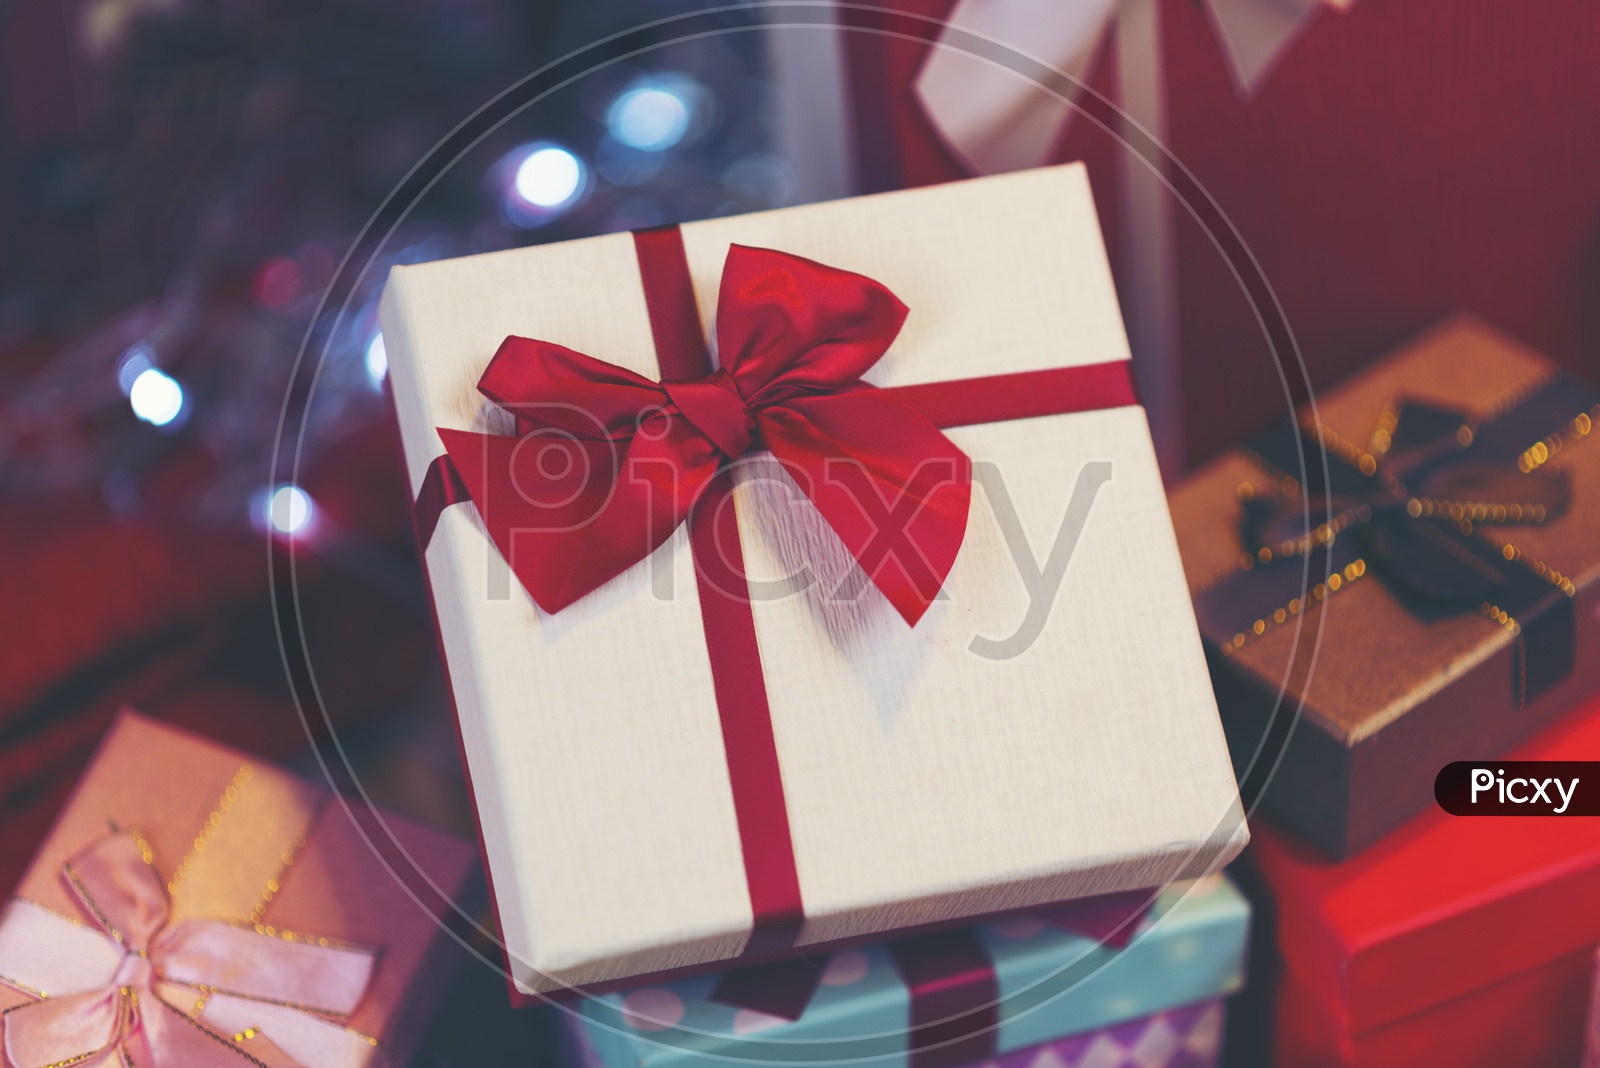 Christmas  Festival Templates Or Backgrounds With Gifts